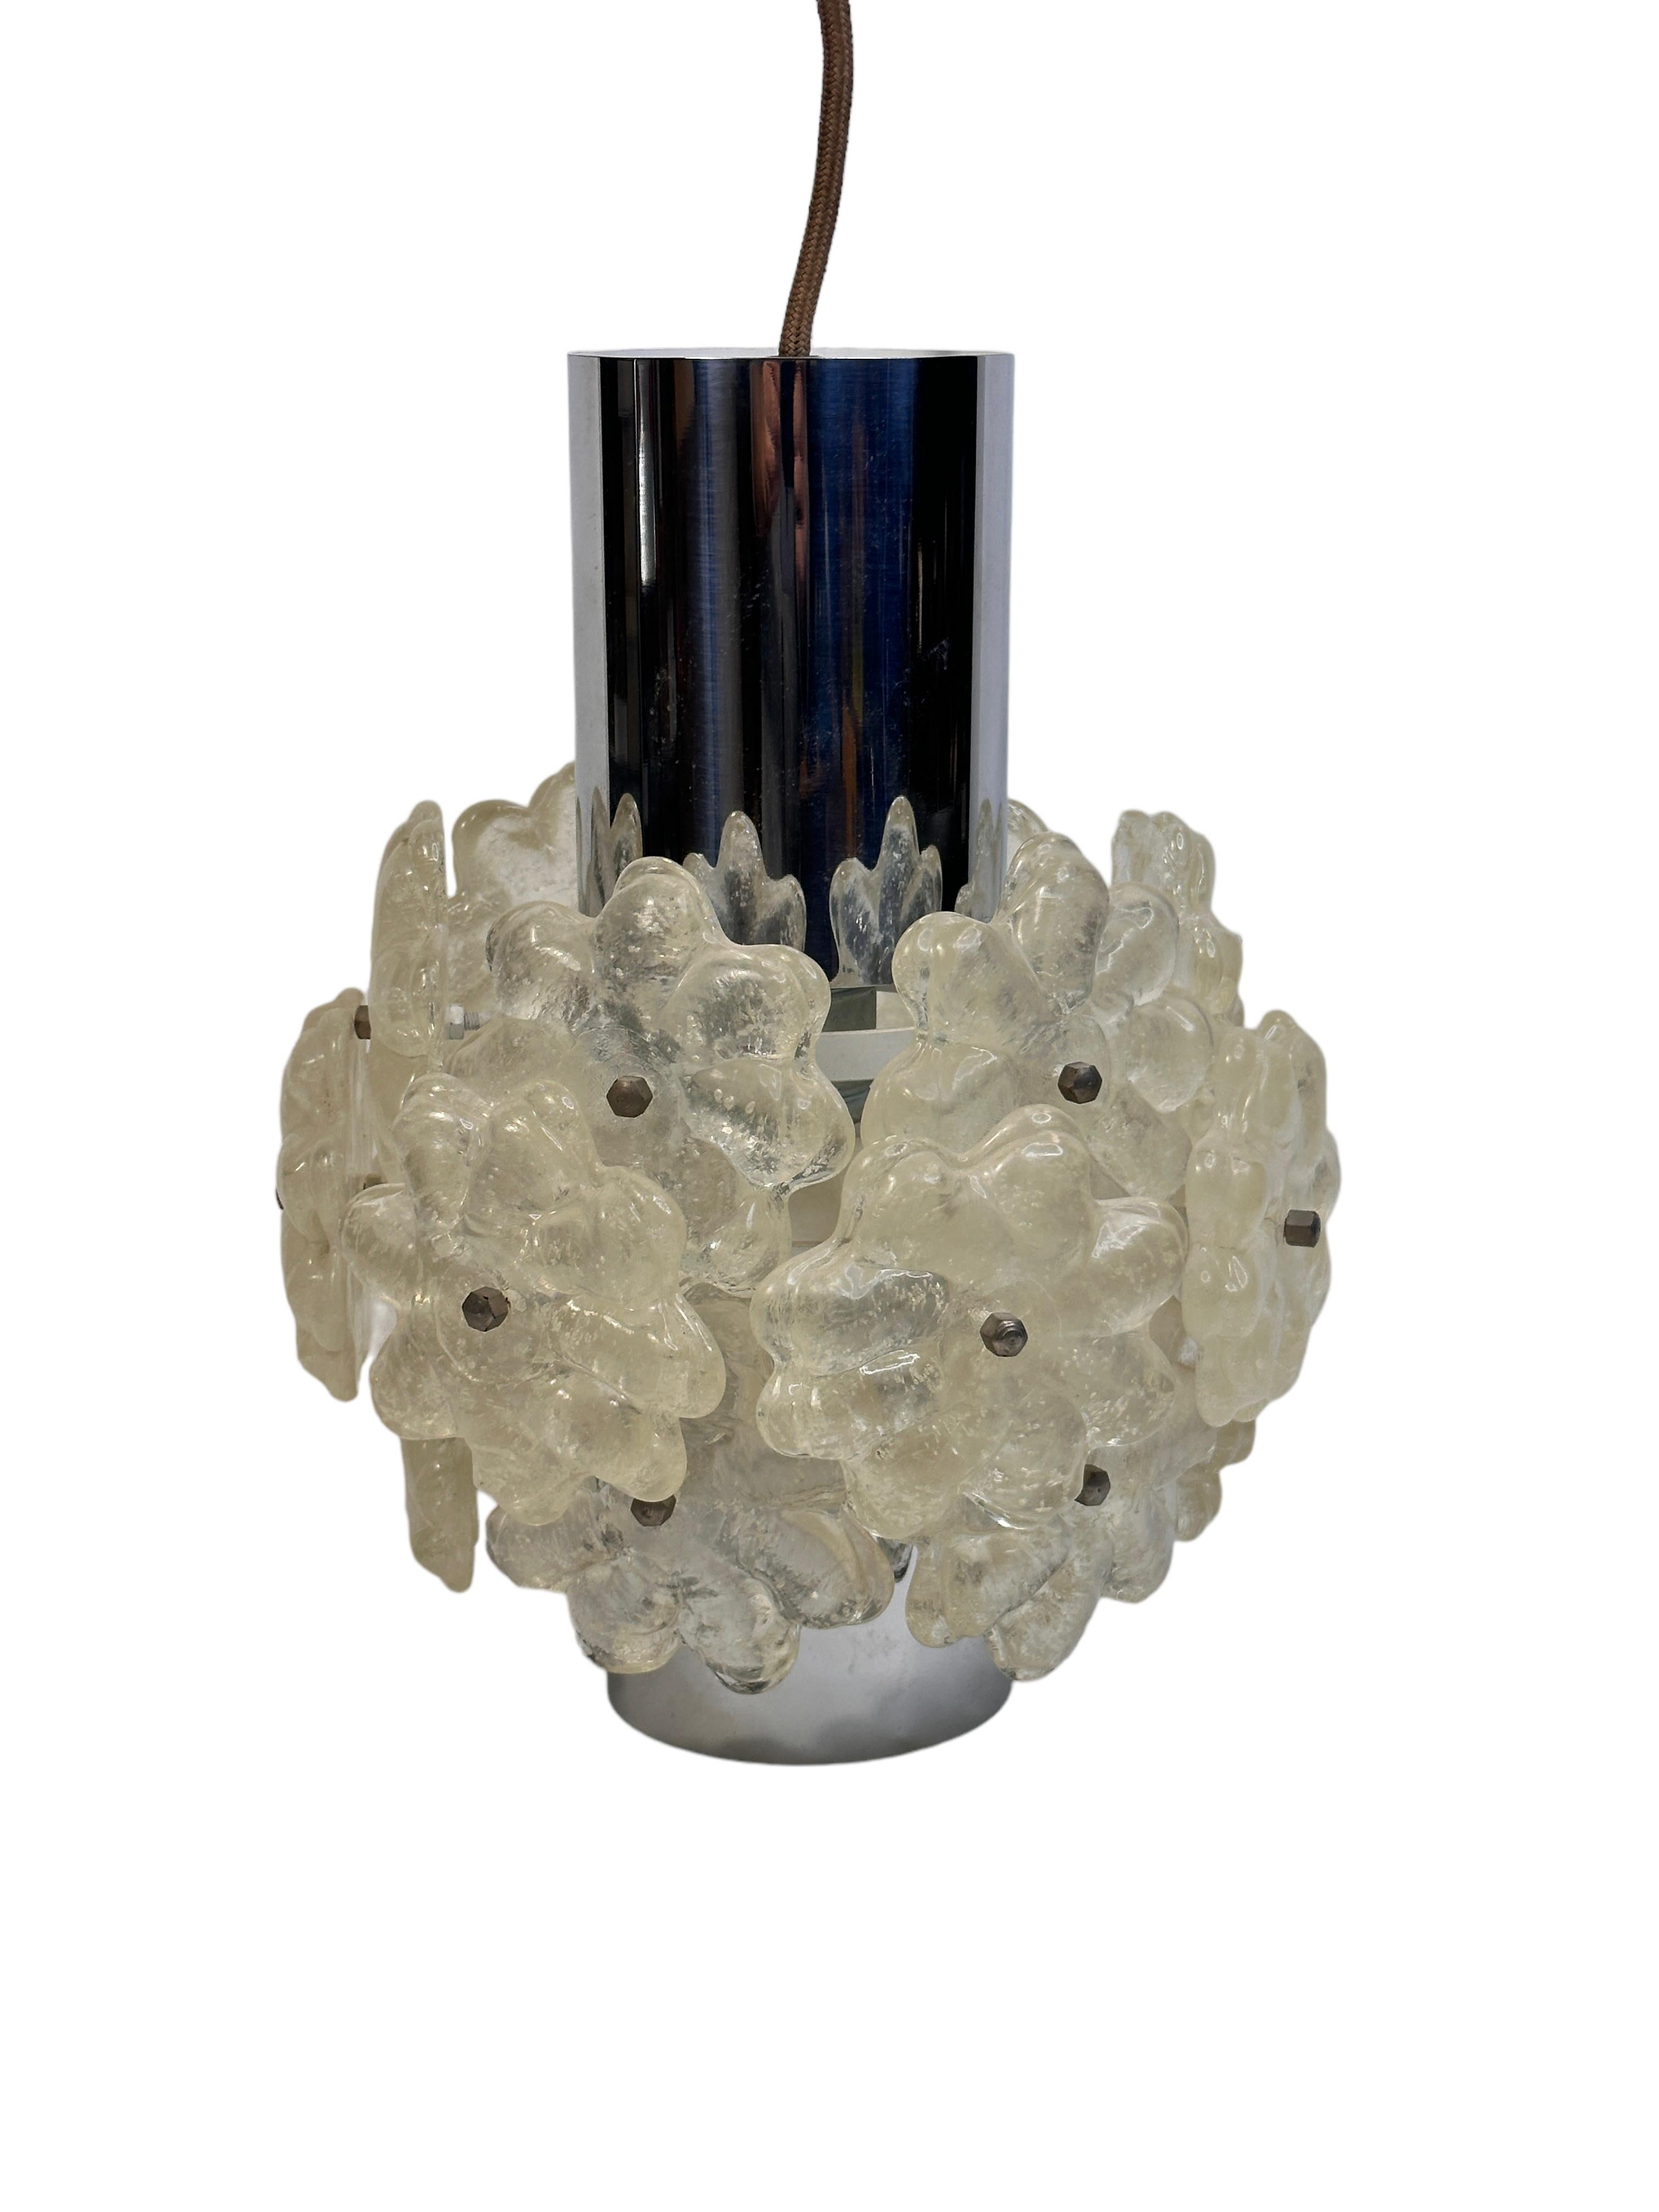 1 of 6 Chrome Pendant Fixture with Lucite Flower Clusters by Kalmar Austria 1960 For Sale 5